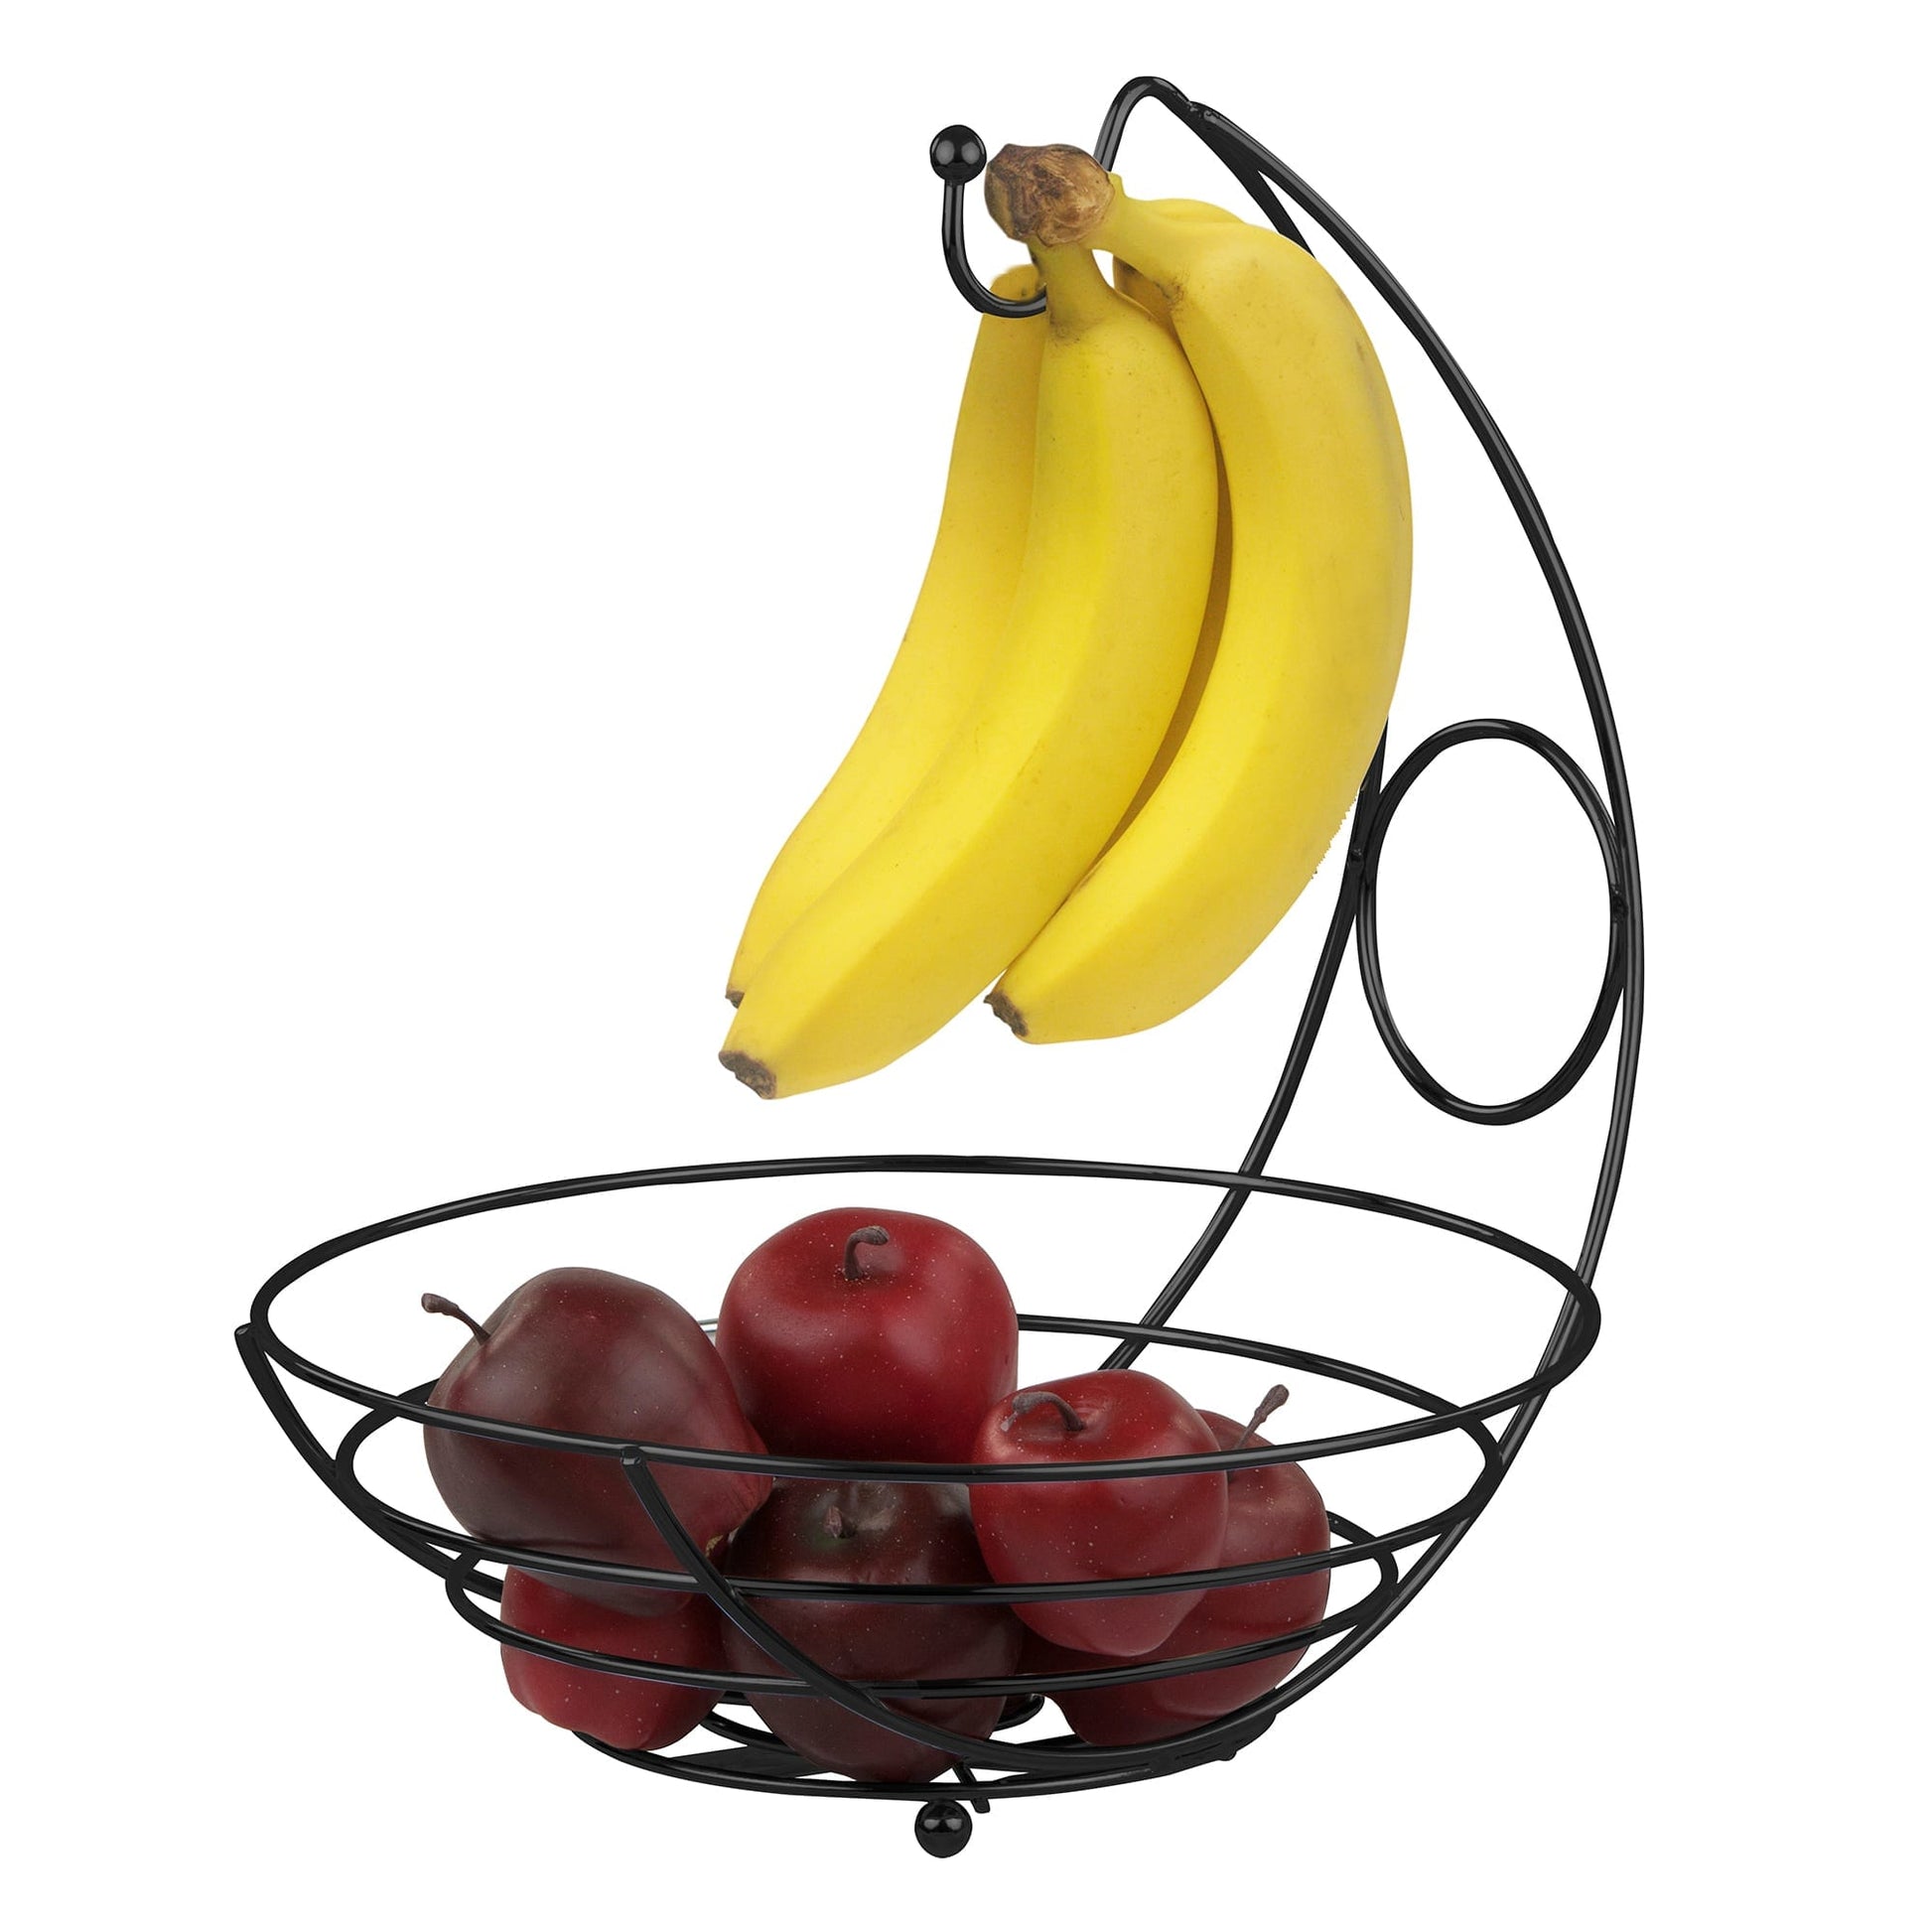 CPDD 2 Tier Fruit Basket With Banana Hook Vegetables And Fruit